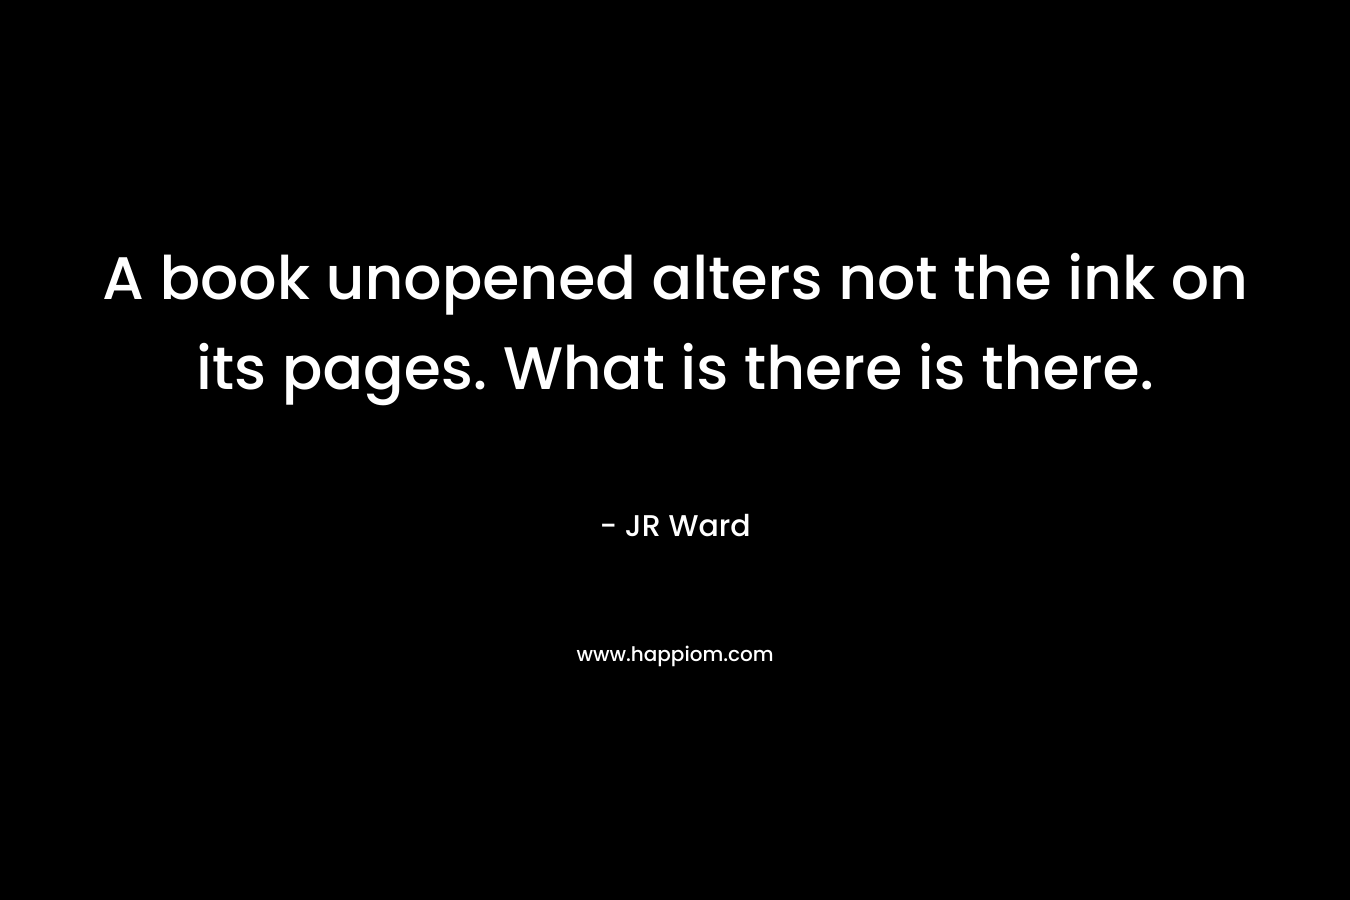 A book unopened alters not the ink on its pages. What is there is there.